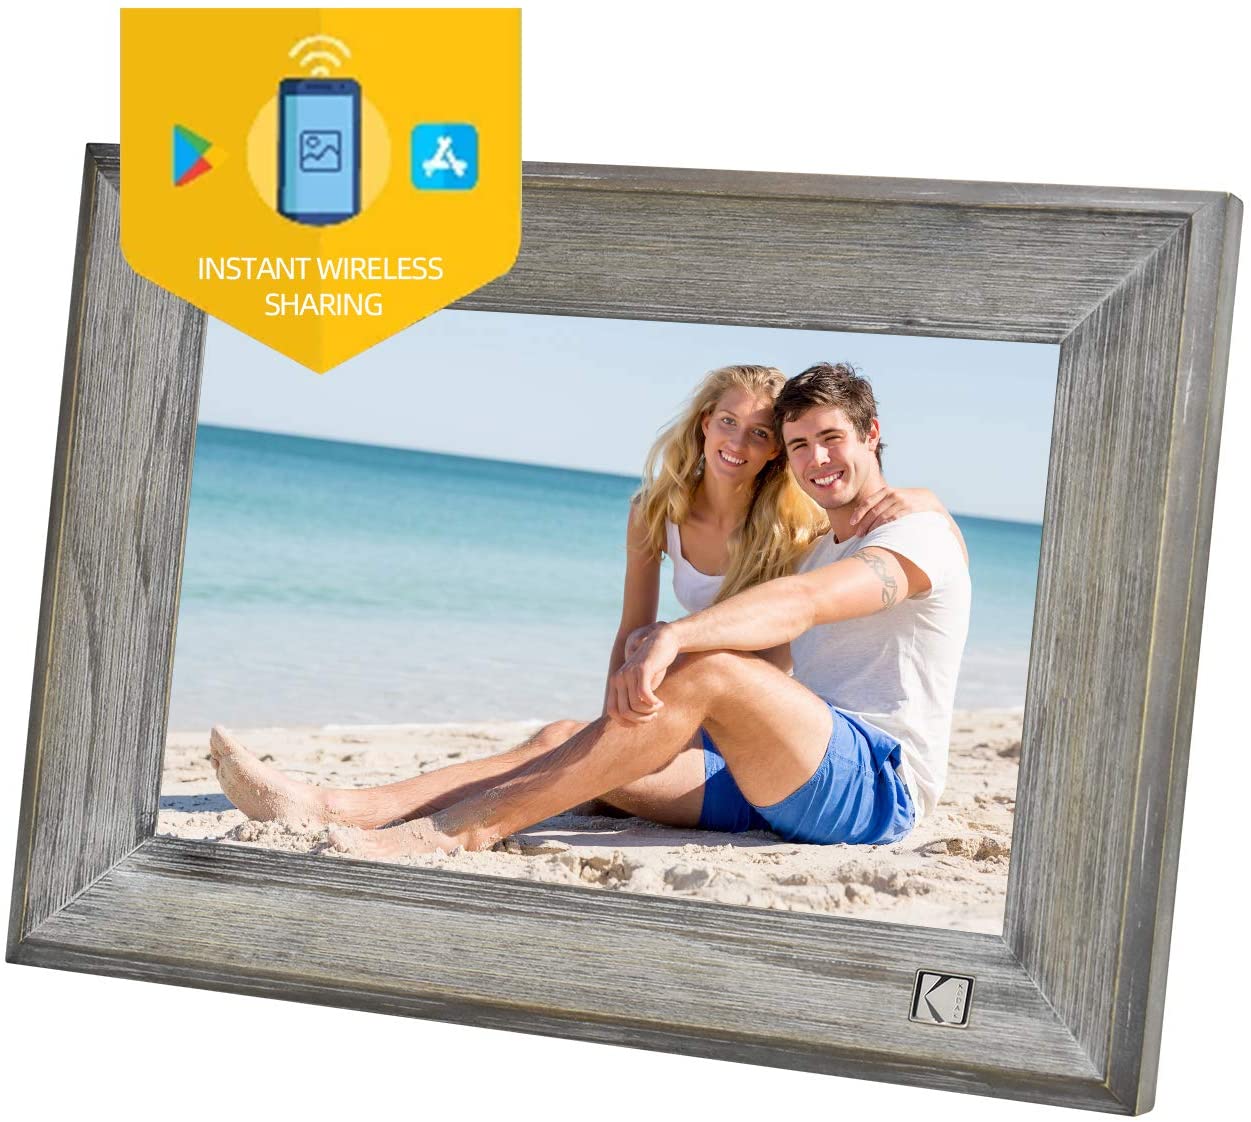 KODAK Classic Digital Photo Wood Frame 1013W, 10 inch Touch Screen Electronic Picture Frame Wifi Enabled with 16GB Internal Memory